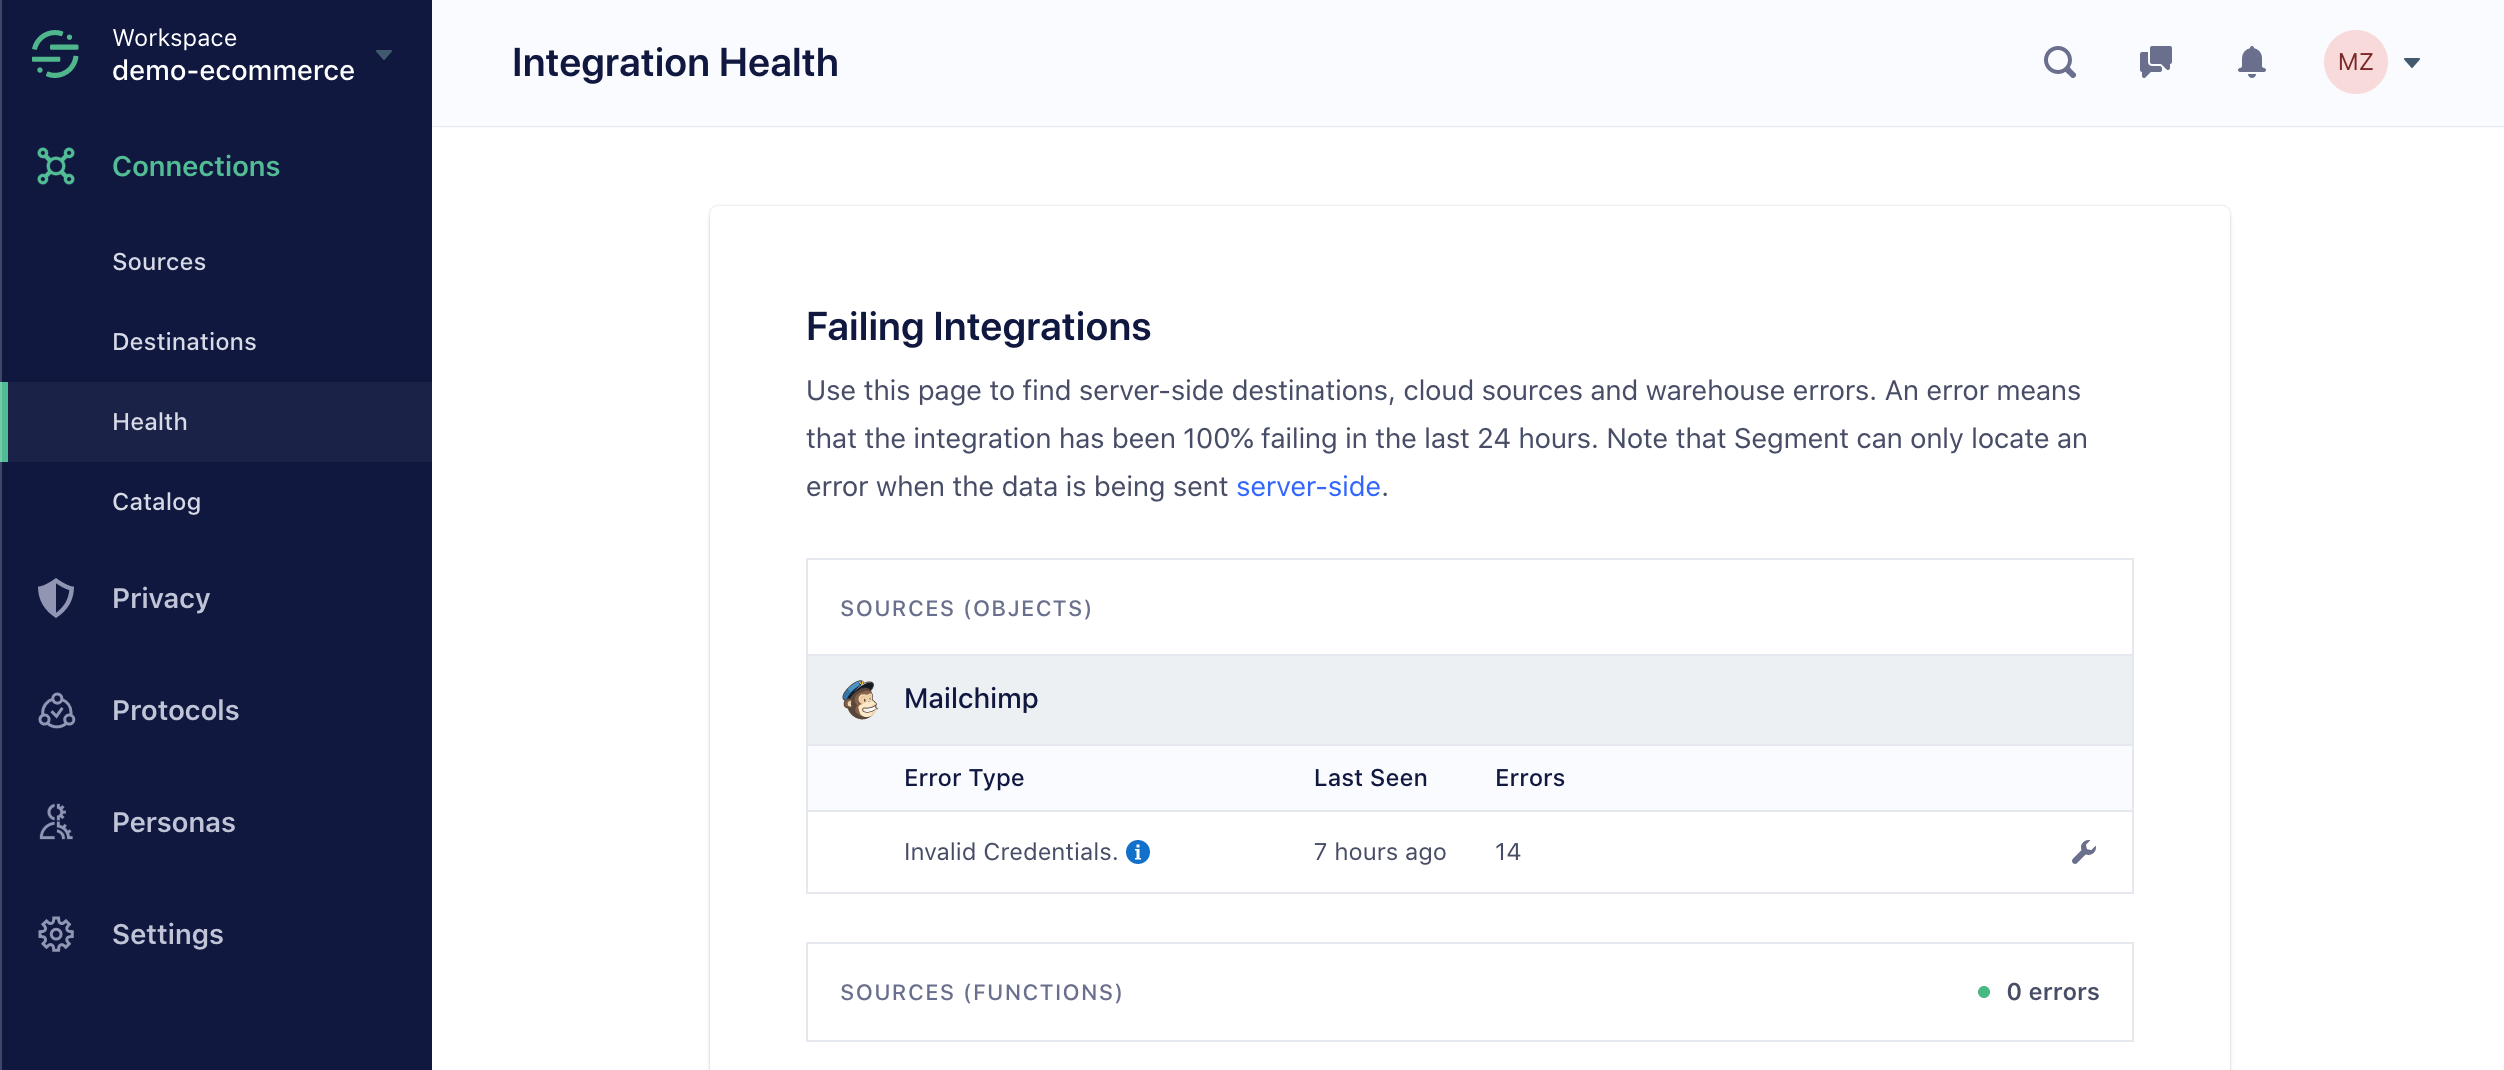 Screenshot of the Integration Health page in the Segment app.